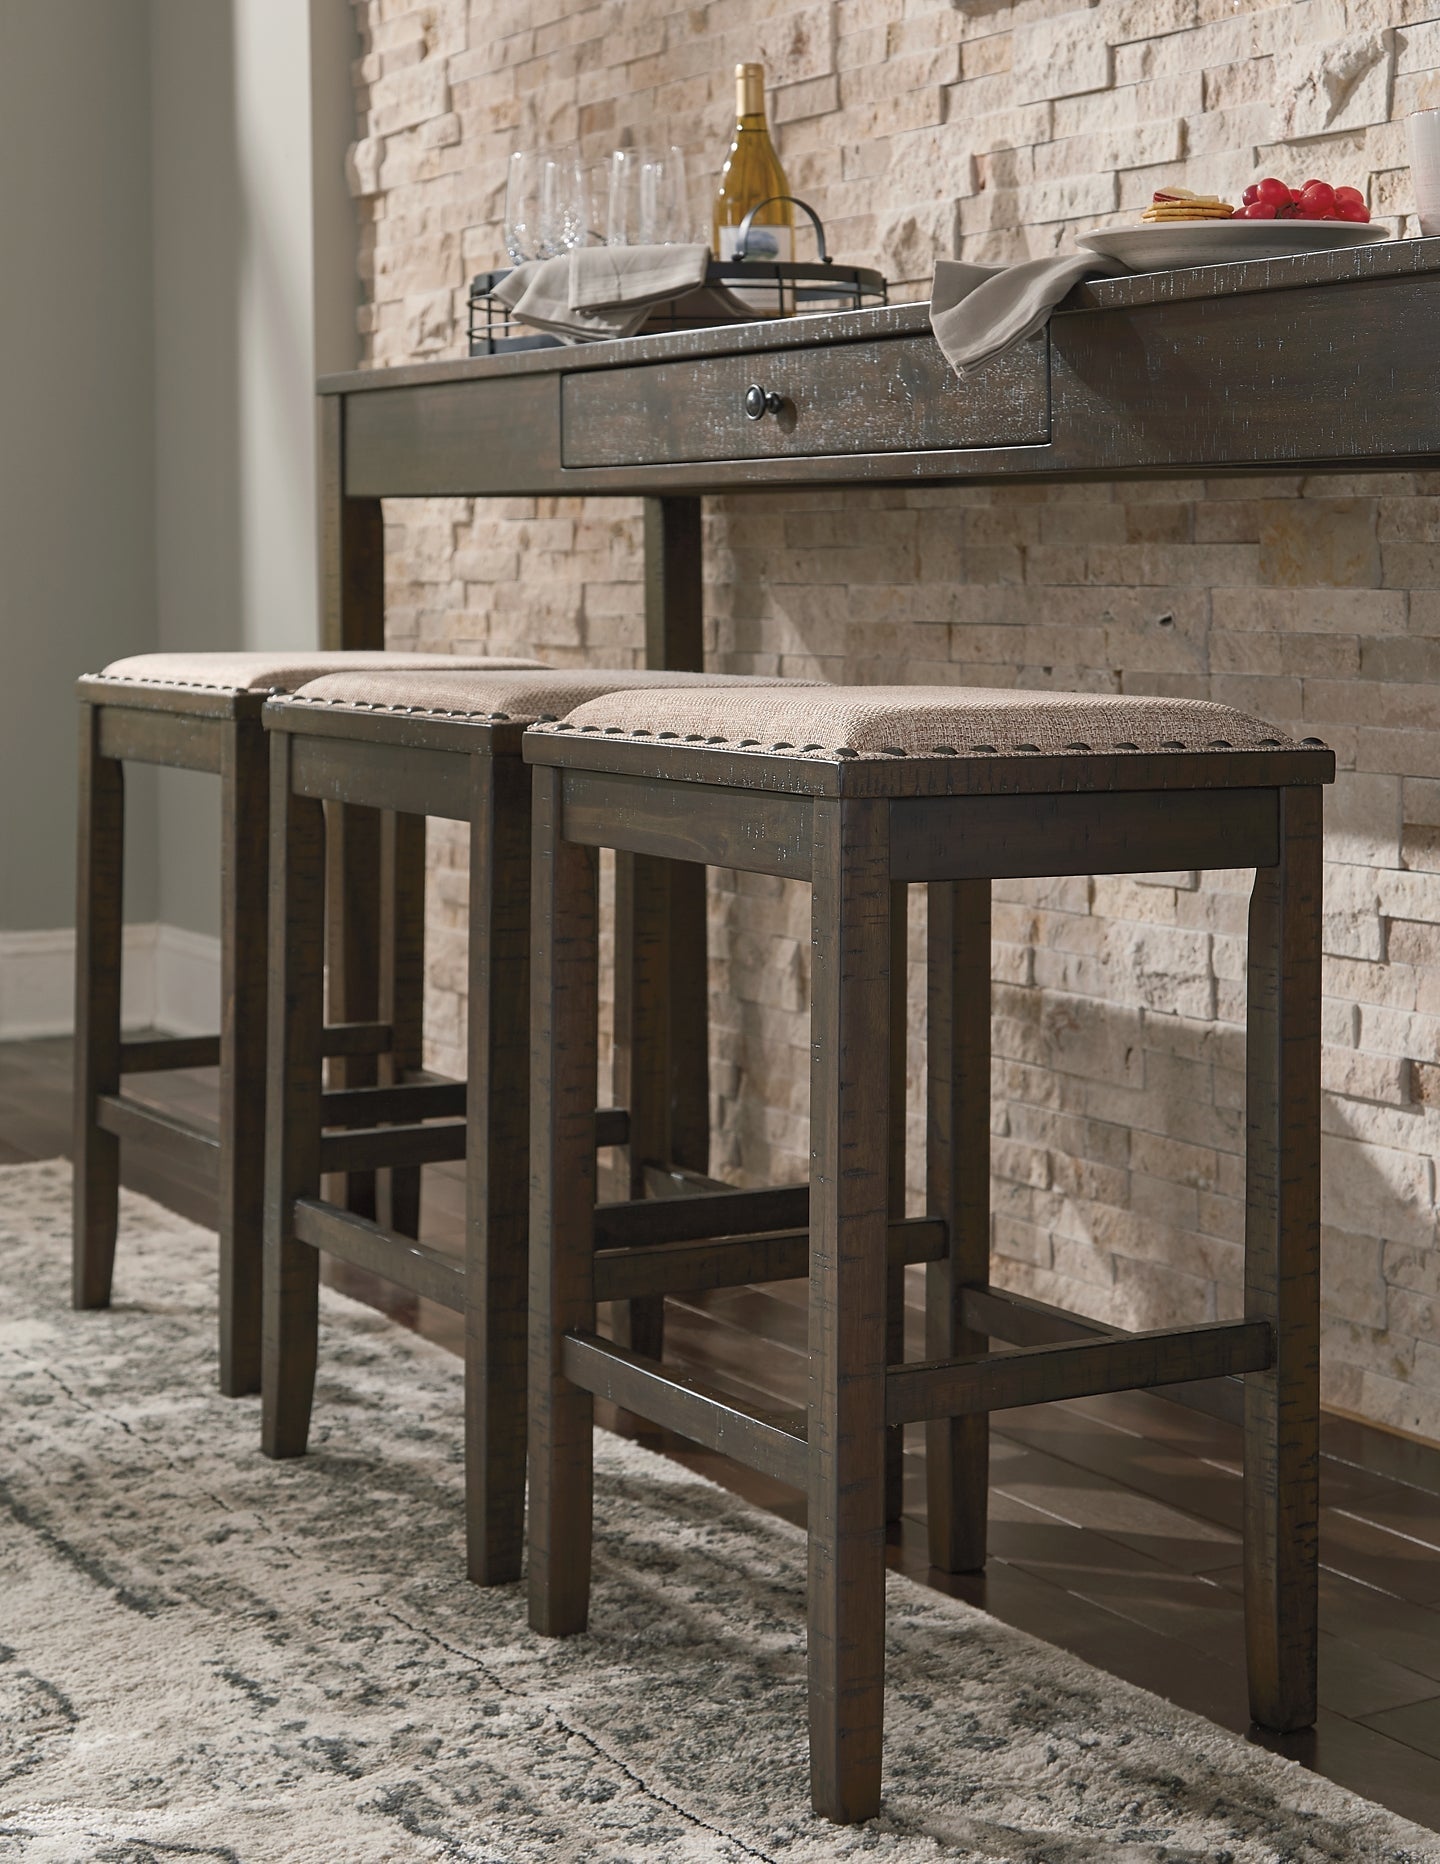 Rokane Counter Height Dining Table and Bar Stools (Set of 4)